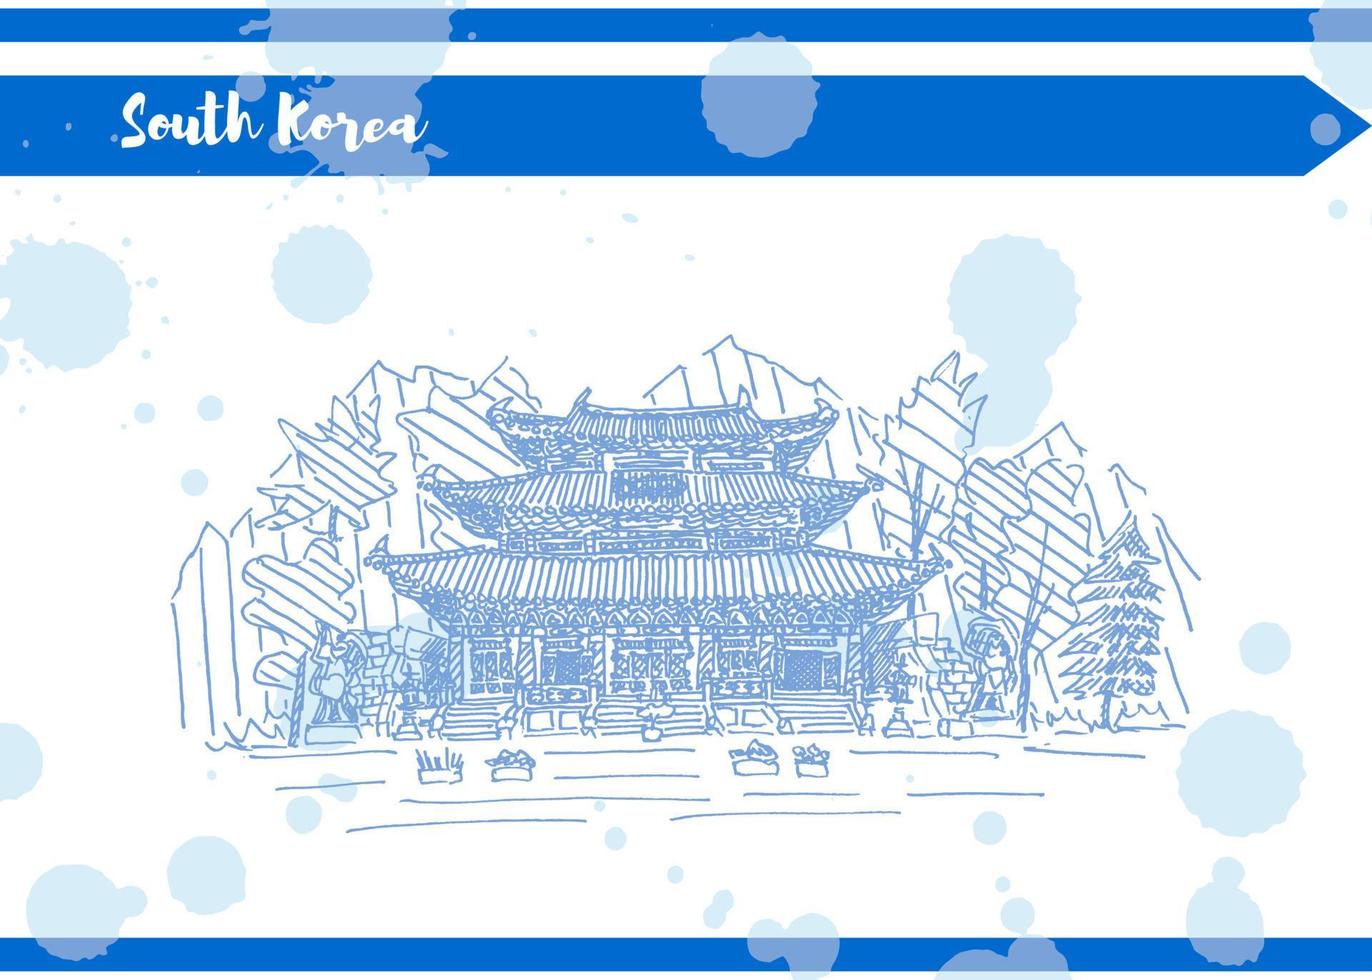 South Korea postcard with blue blots in sketch style vector